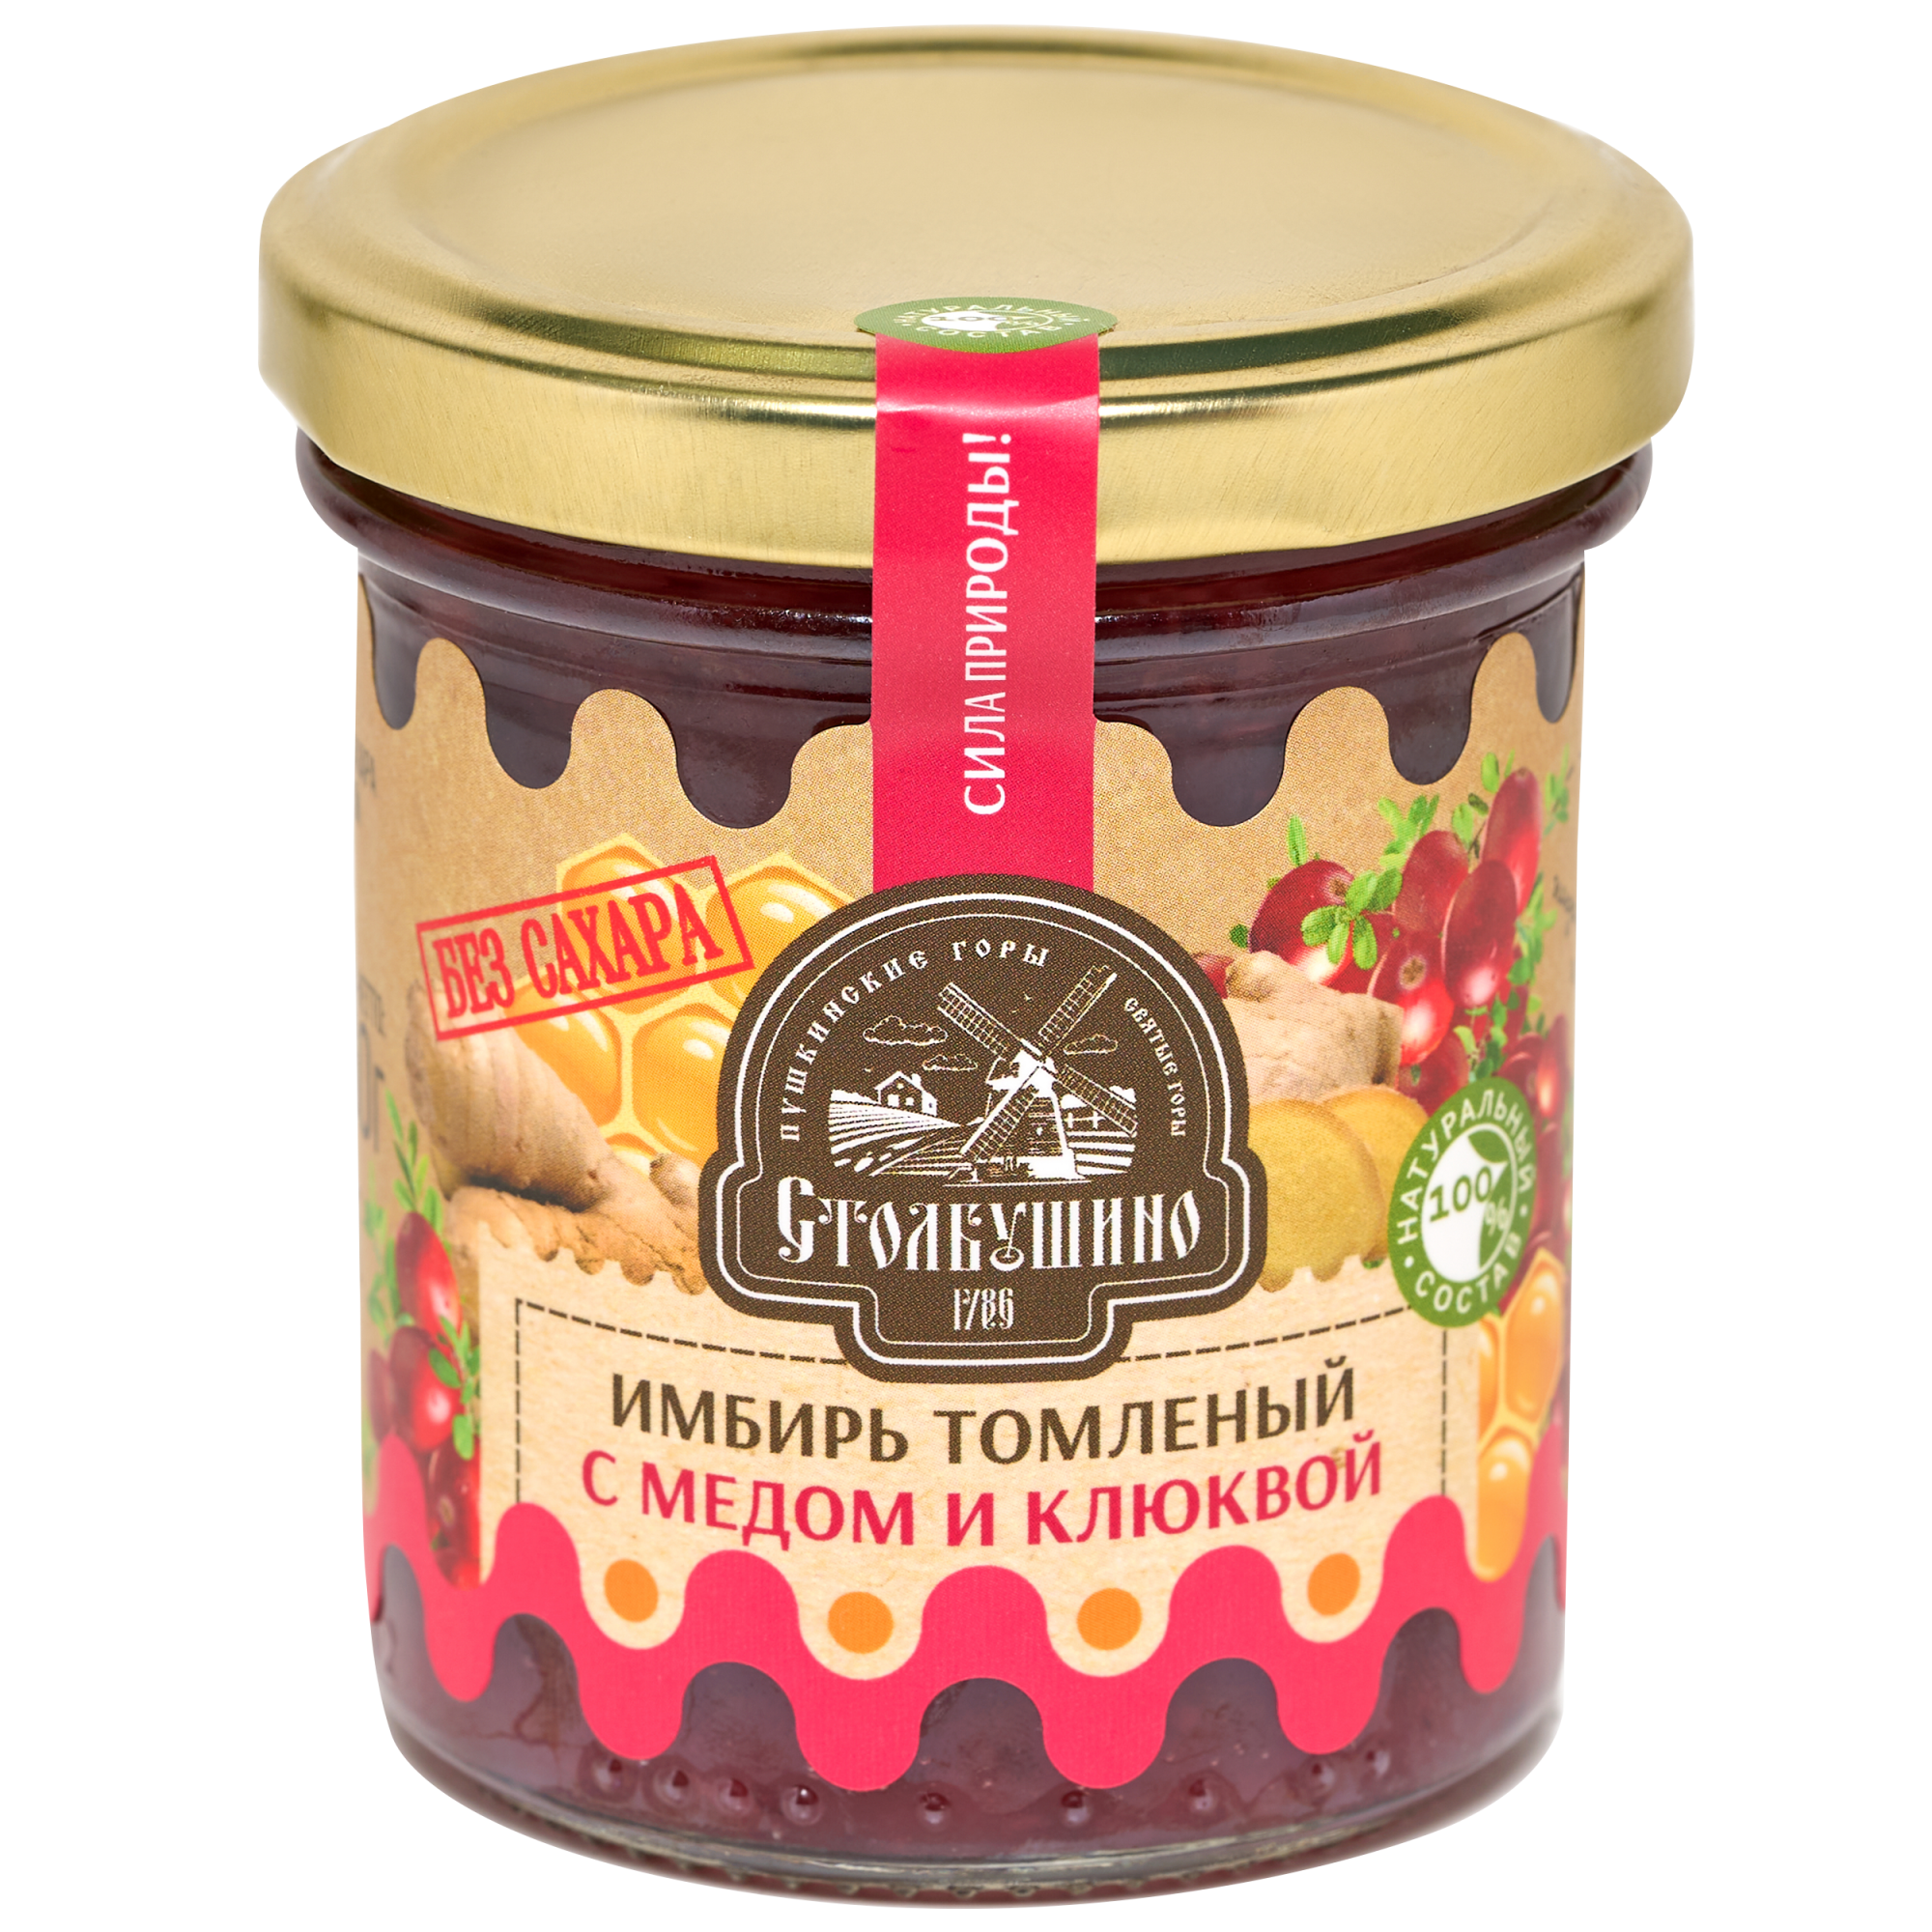 Ginger stewed with honey and cranberries, WITHOUT SUGAR "Stolbushino" 160 gr.